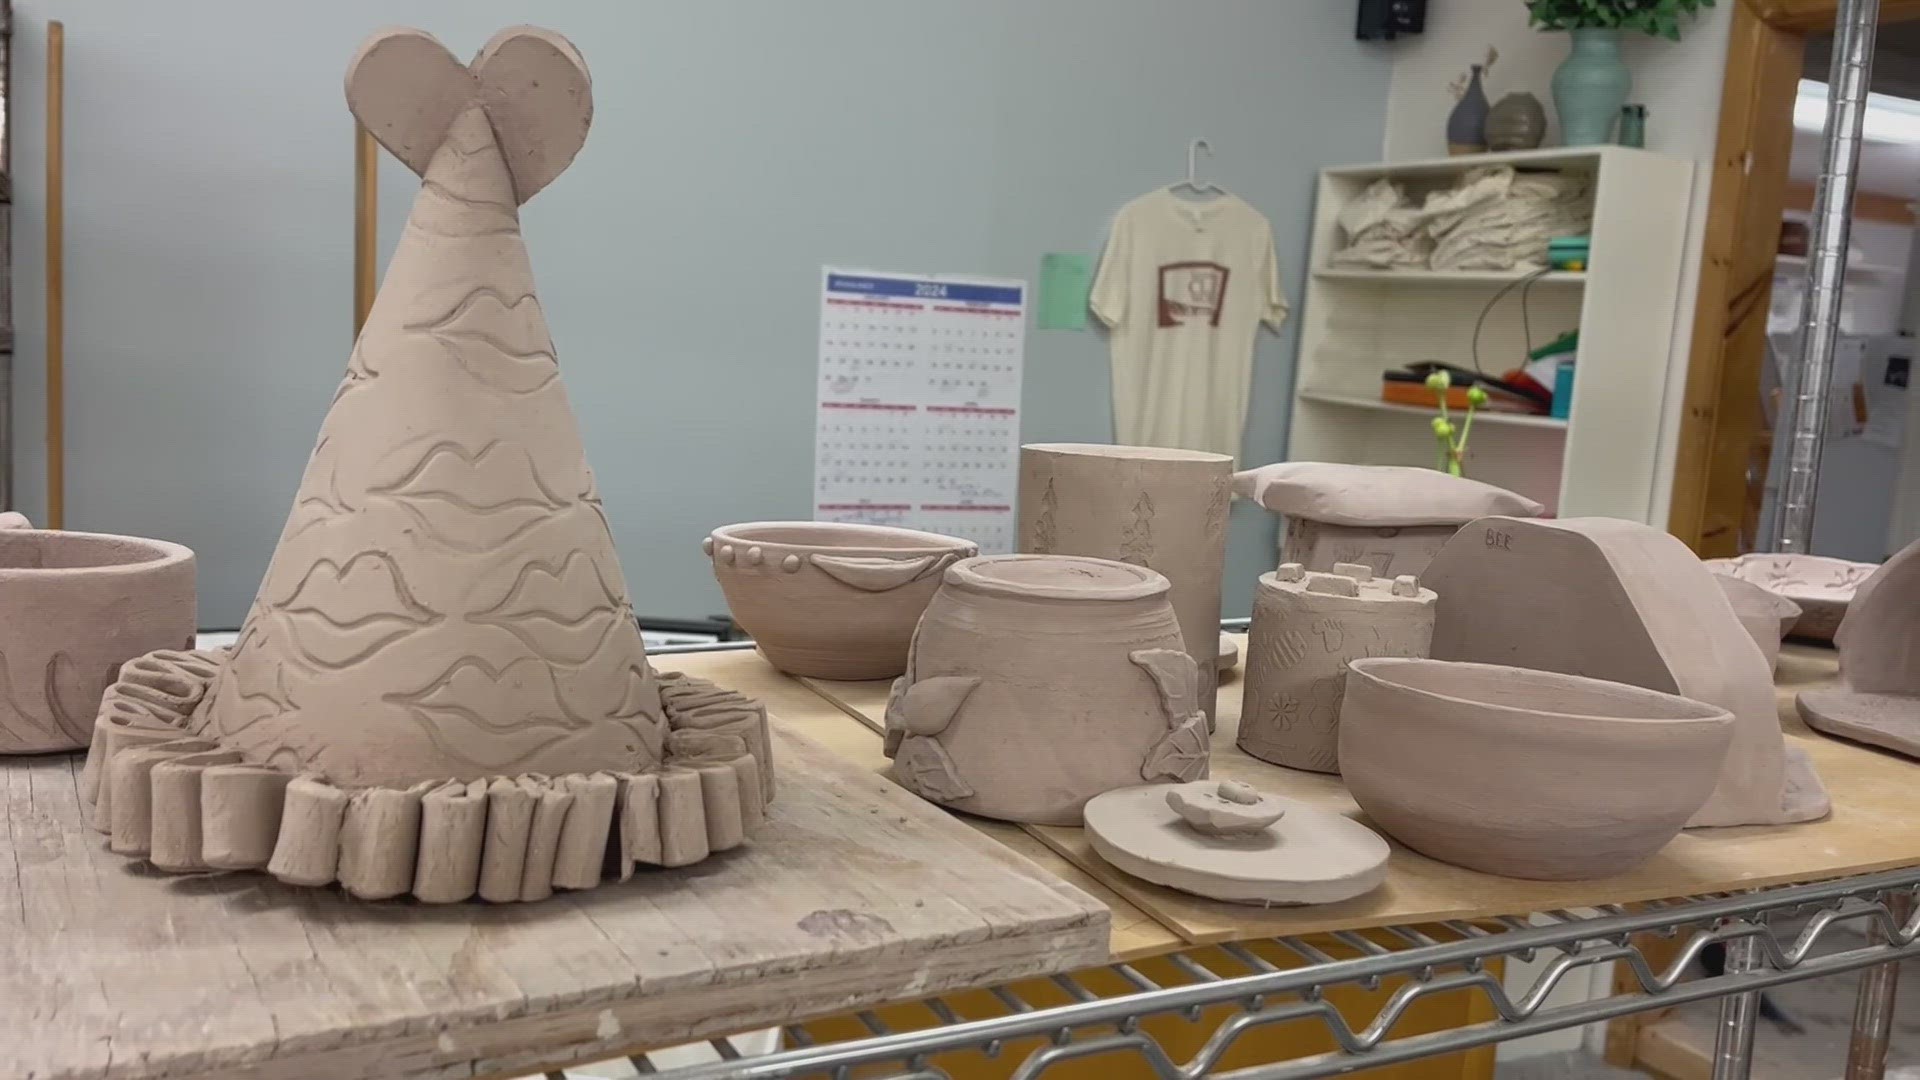 In Augusta, Kennebec Clay Works owner Malley Weber offers skill-building classes in pottery to all ages and levels.